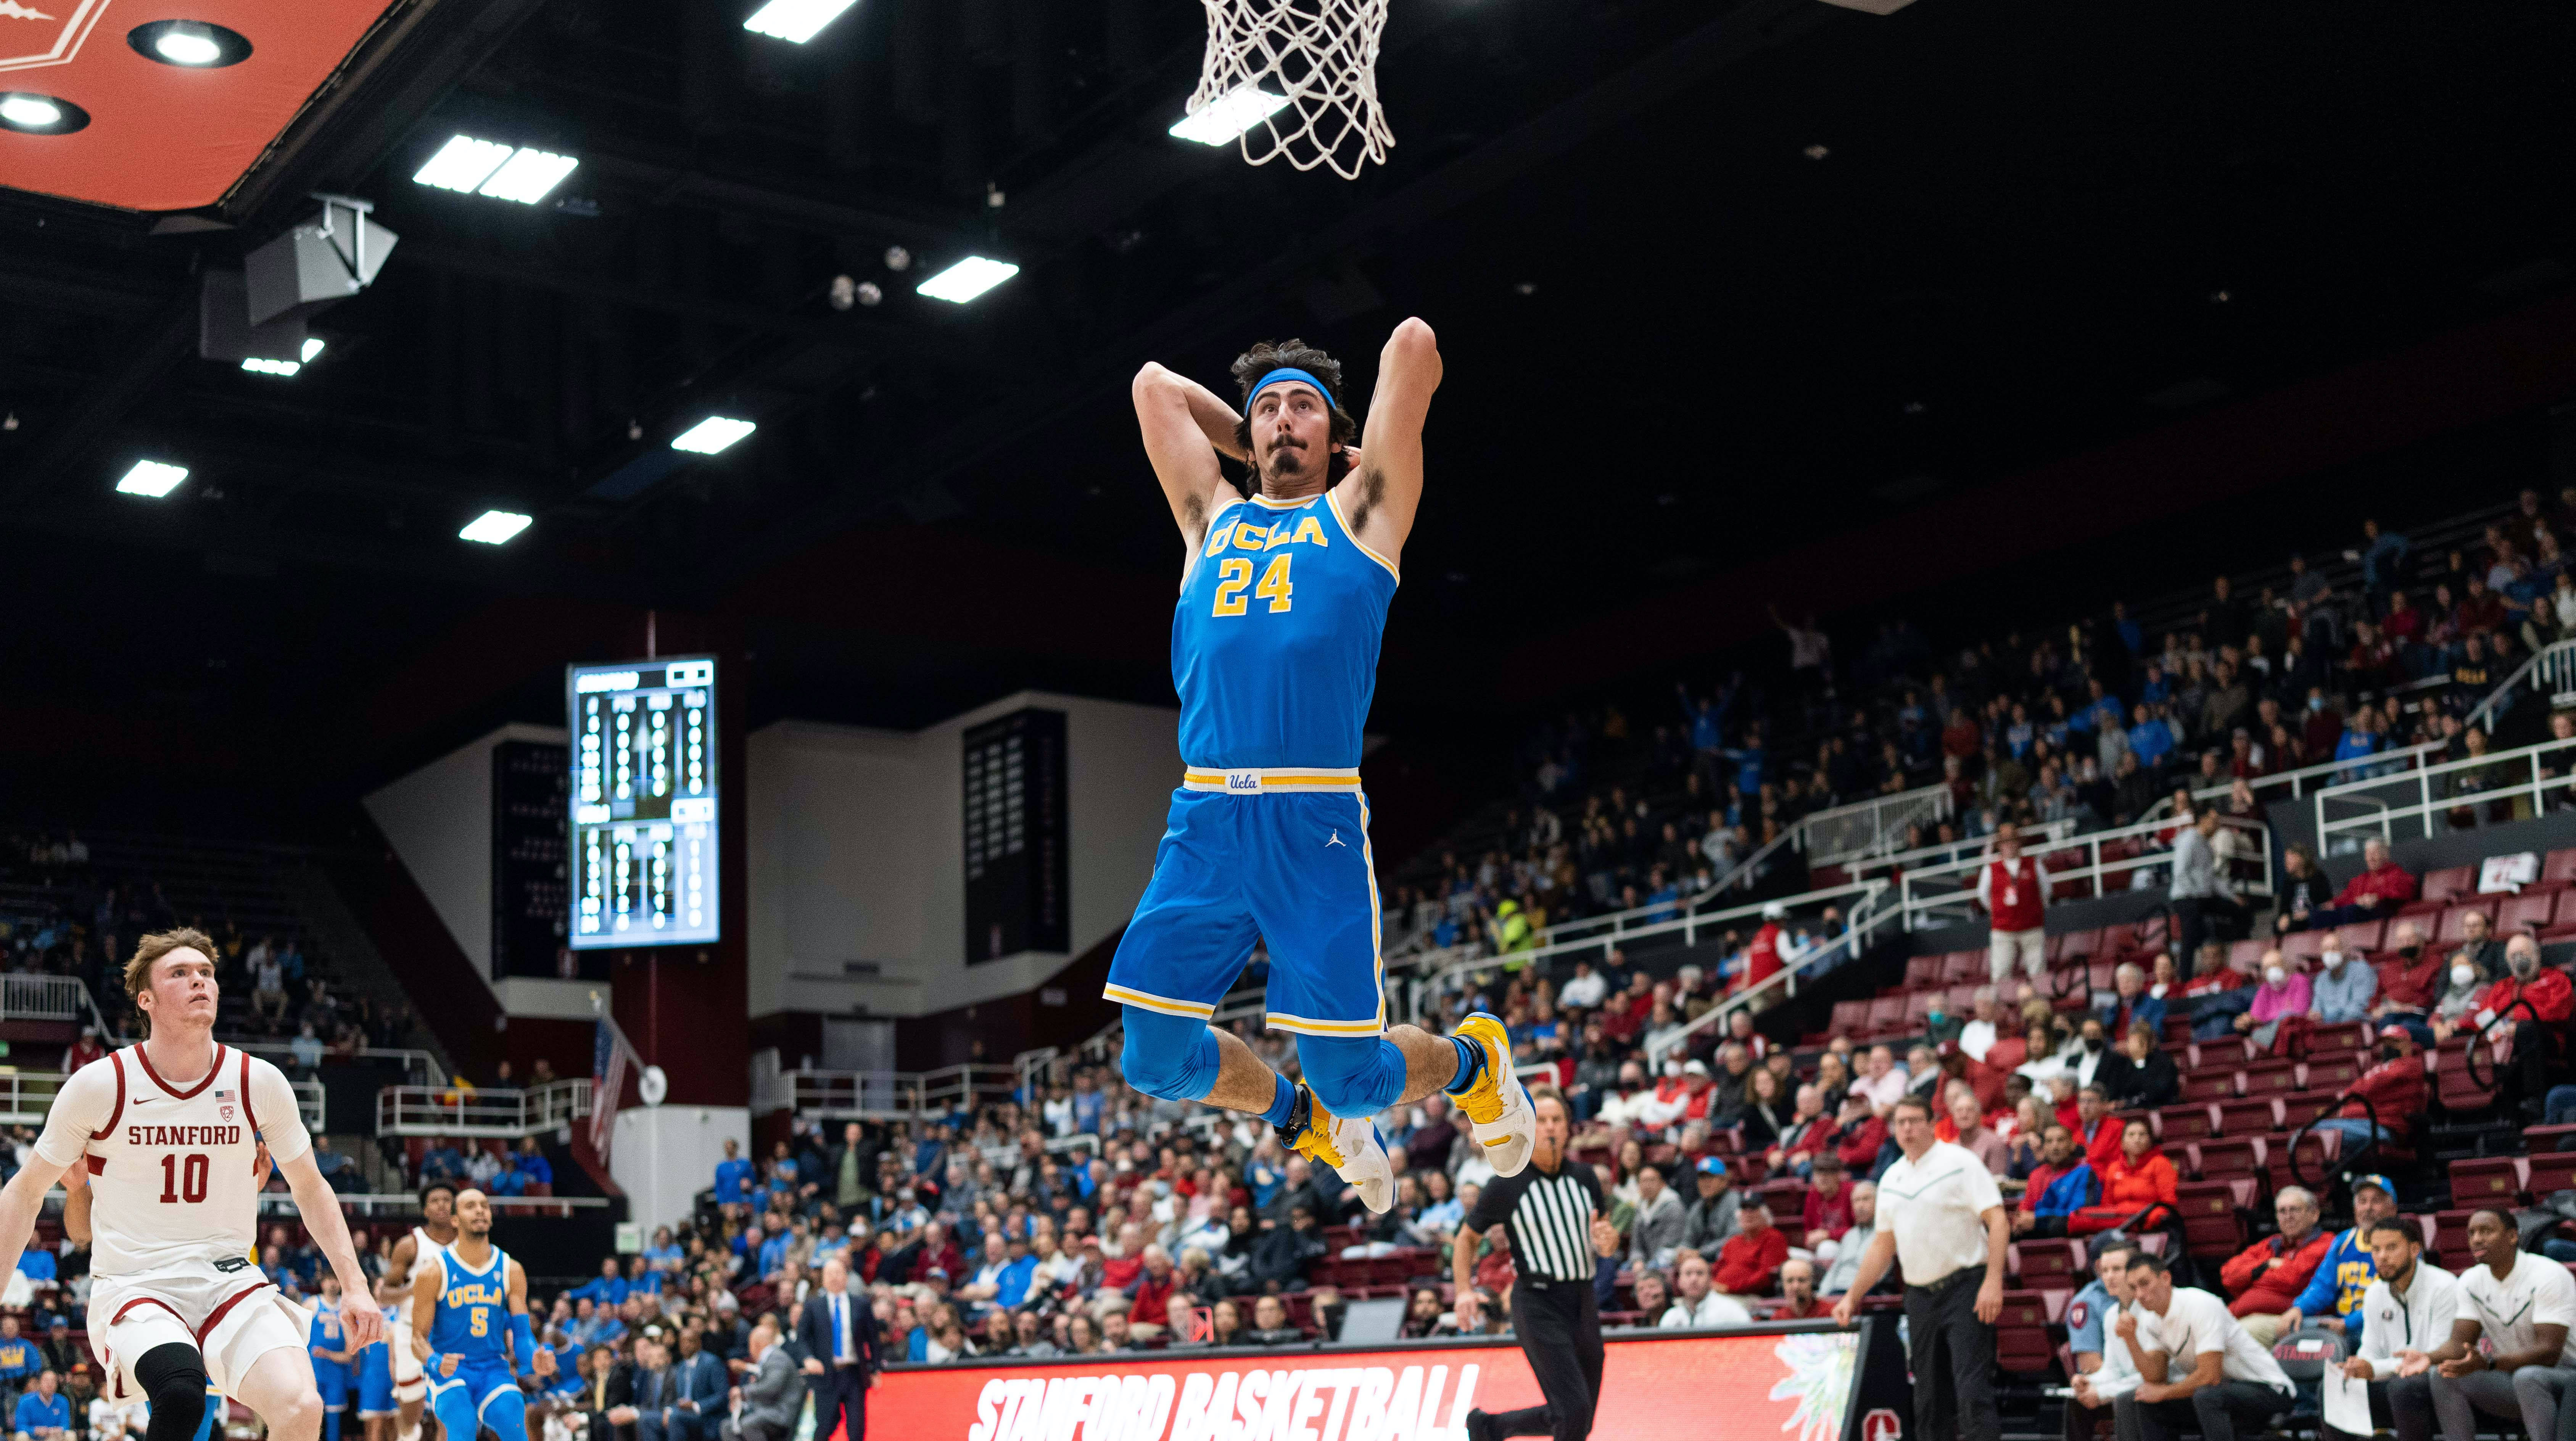 UCLA Men’s Basketball Holds on To Beat Stanford in Tale of 2 Halves